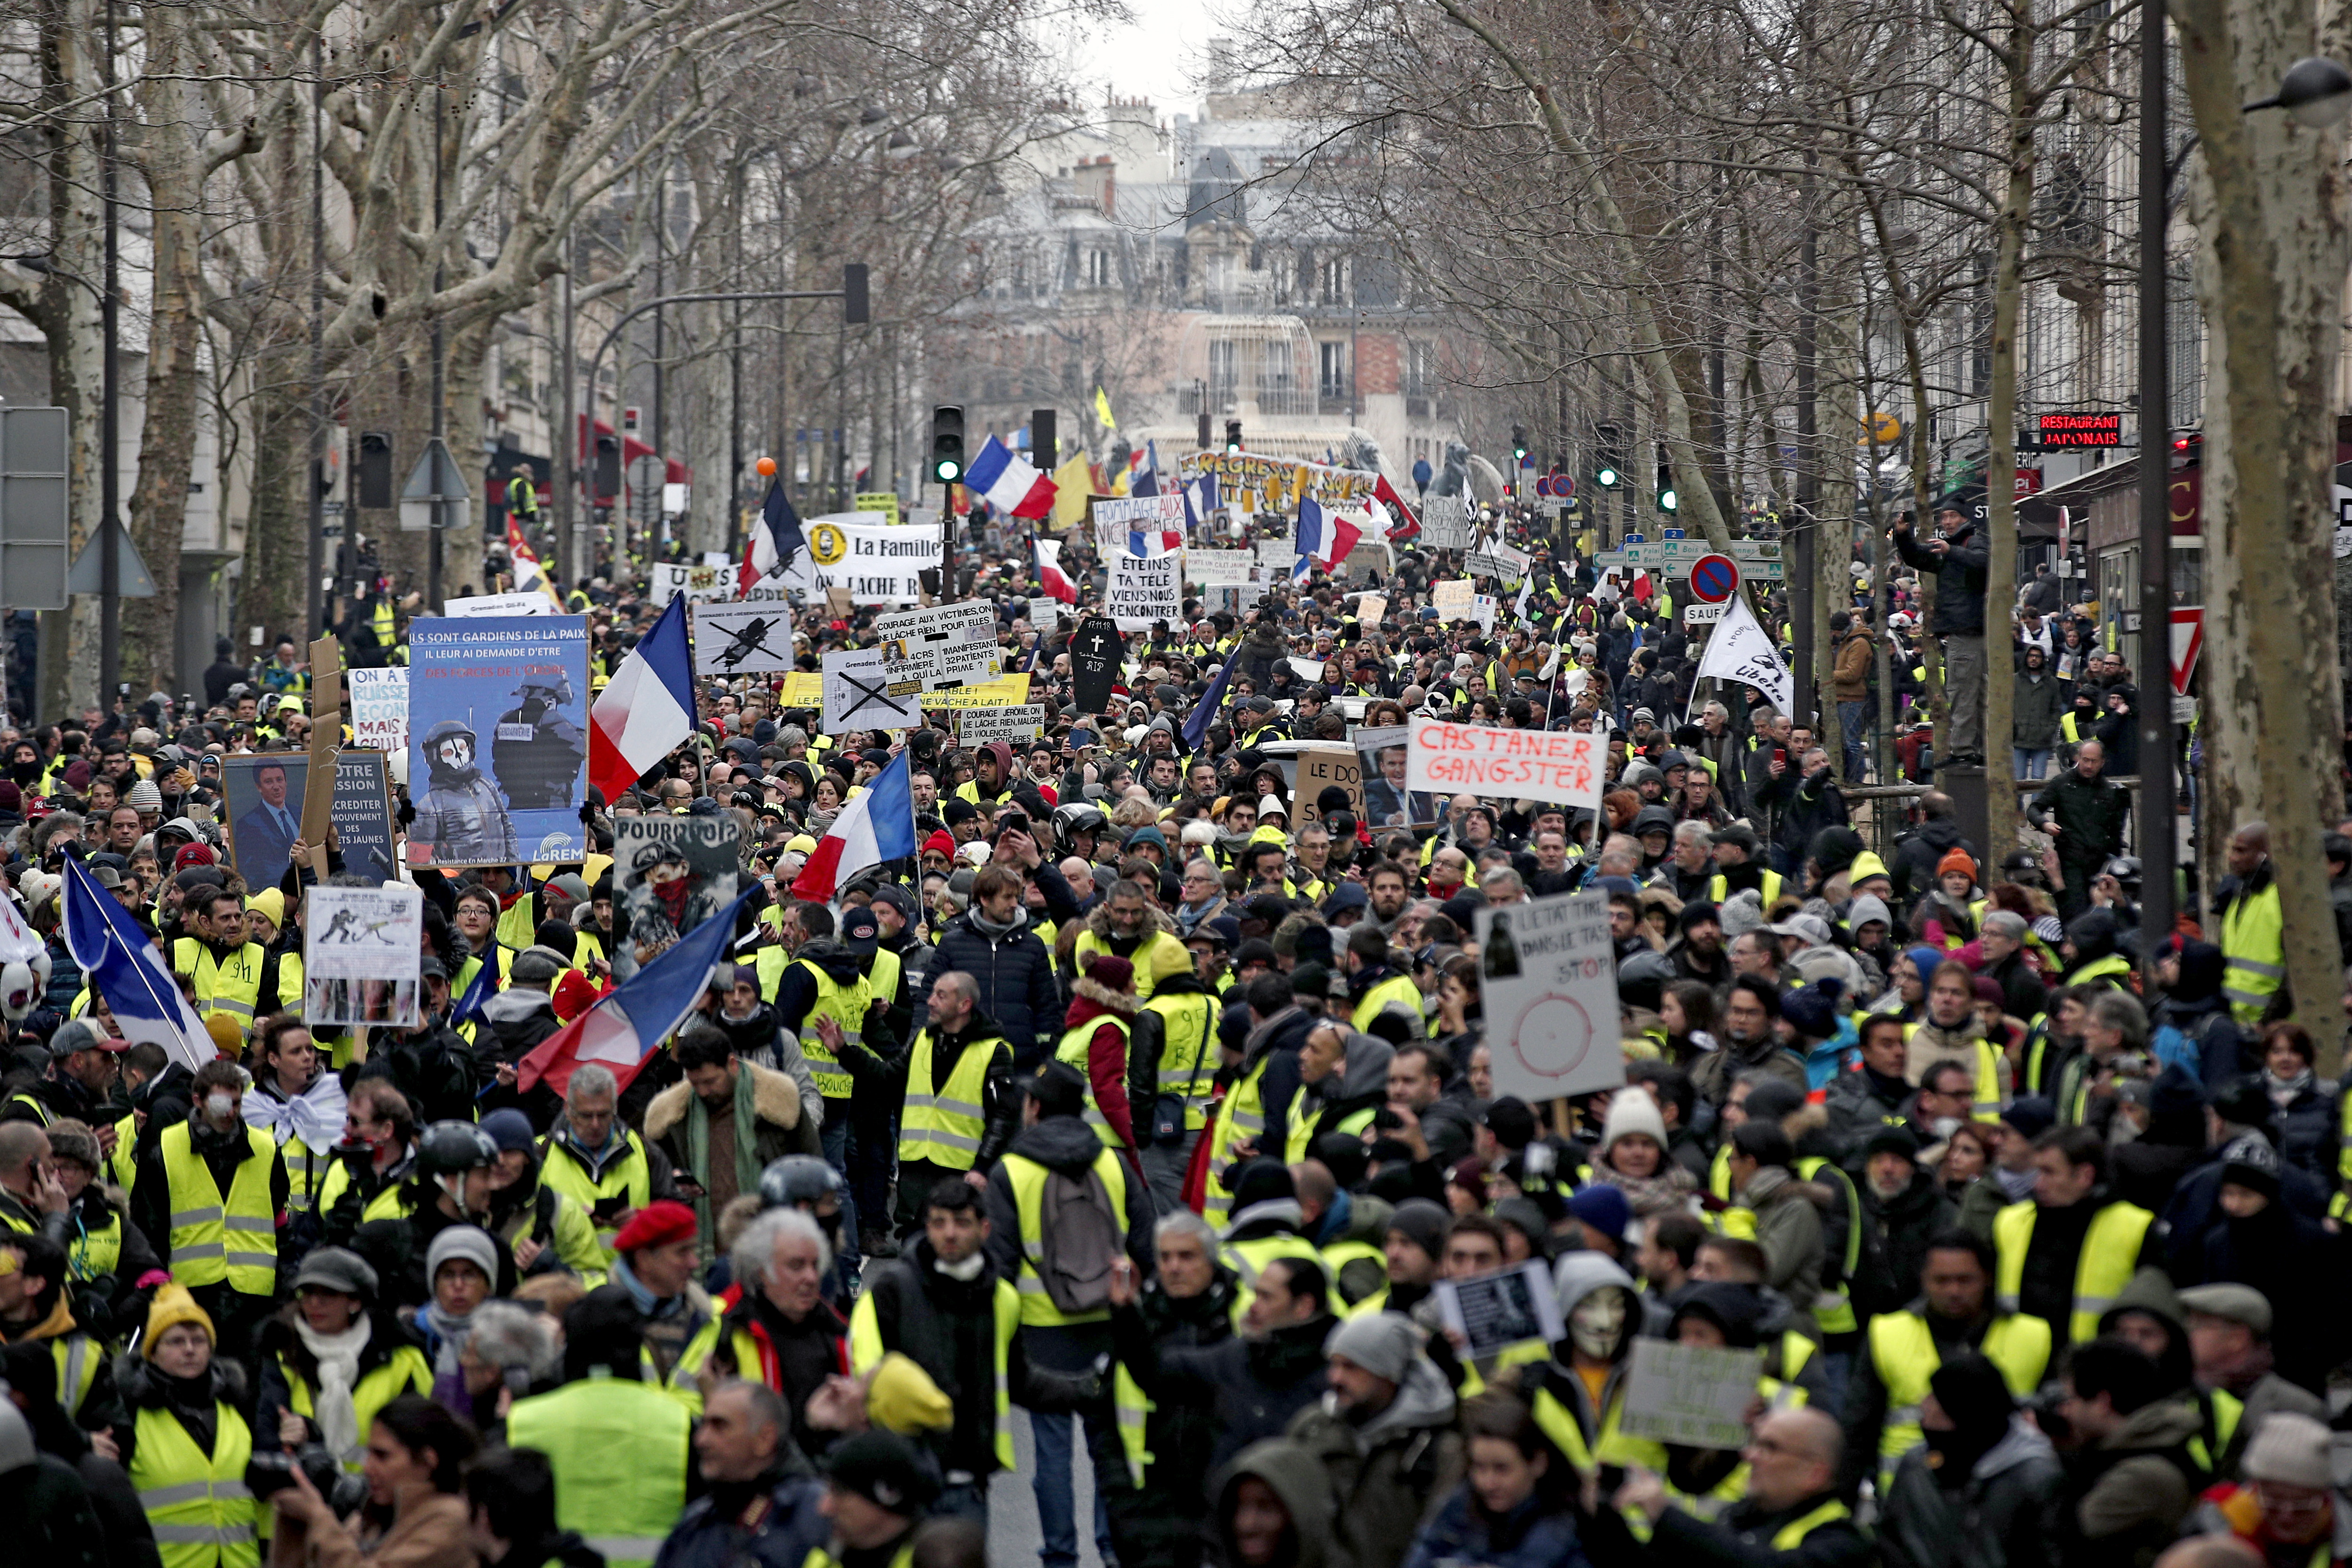 epa07337962 Protesters from the 'Gilets Jaunes' (Yellow Vests) movement take part in the 'Act XII' demonstration (the 12th consecutive national protest on a Saturday) in Paris, France, 02 February 2019. The so-called 'gilets jaunes' (yellow vests) is a grassroots protest movement with supporters from a wide span of the political spectrum, that originally started with protest across the nation in late 2018 against high fuel prices. The movement in the meantime also protests the French government's tax reforms, the increasing costs of living and some even call for the resignation of French President Emmanuel Macron.  EPA/YOAN VALAT